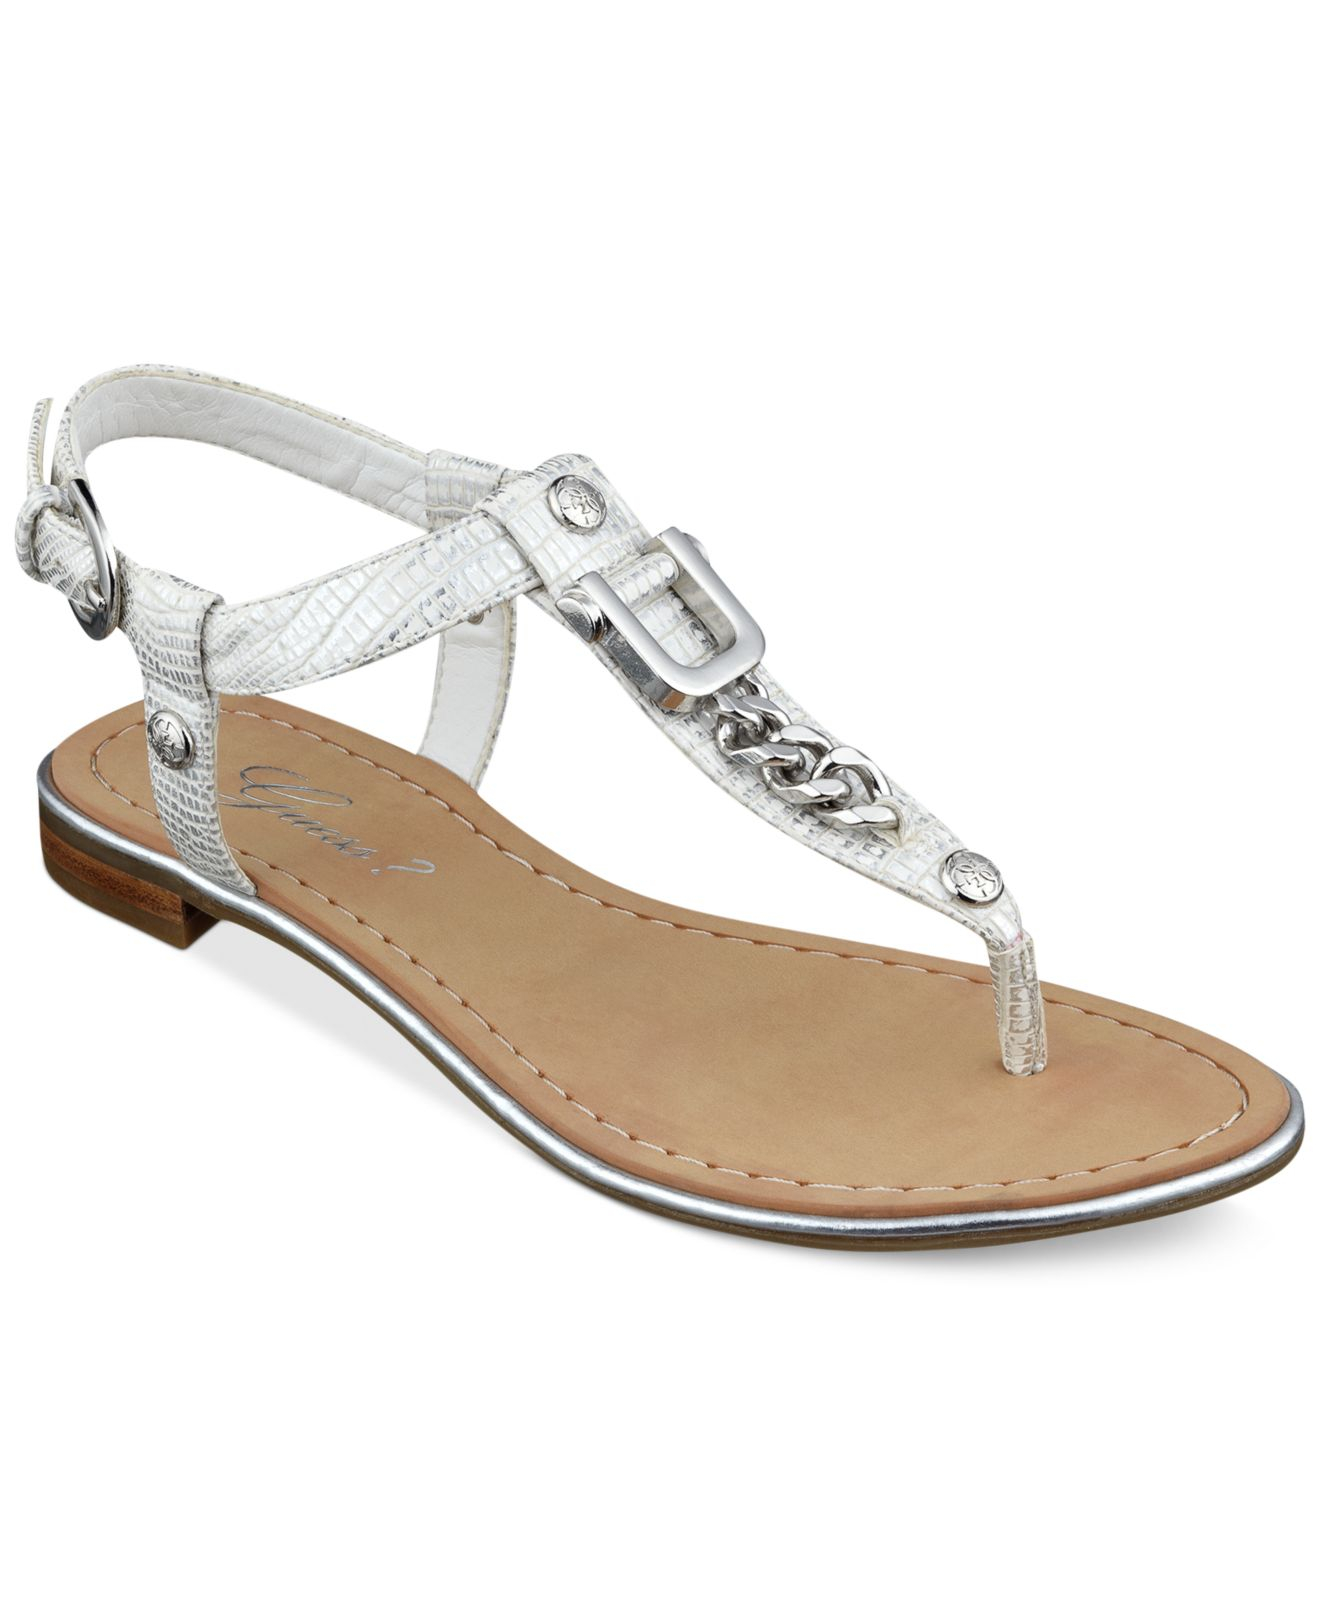 Guess Rehan Chain Thong Sandals in White